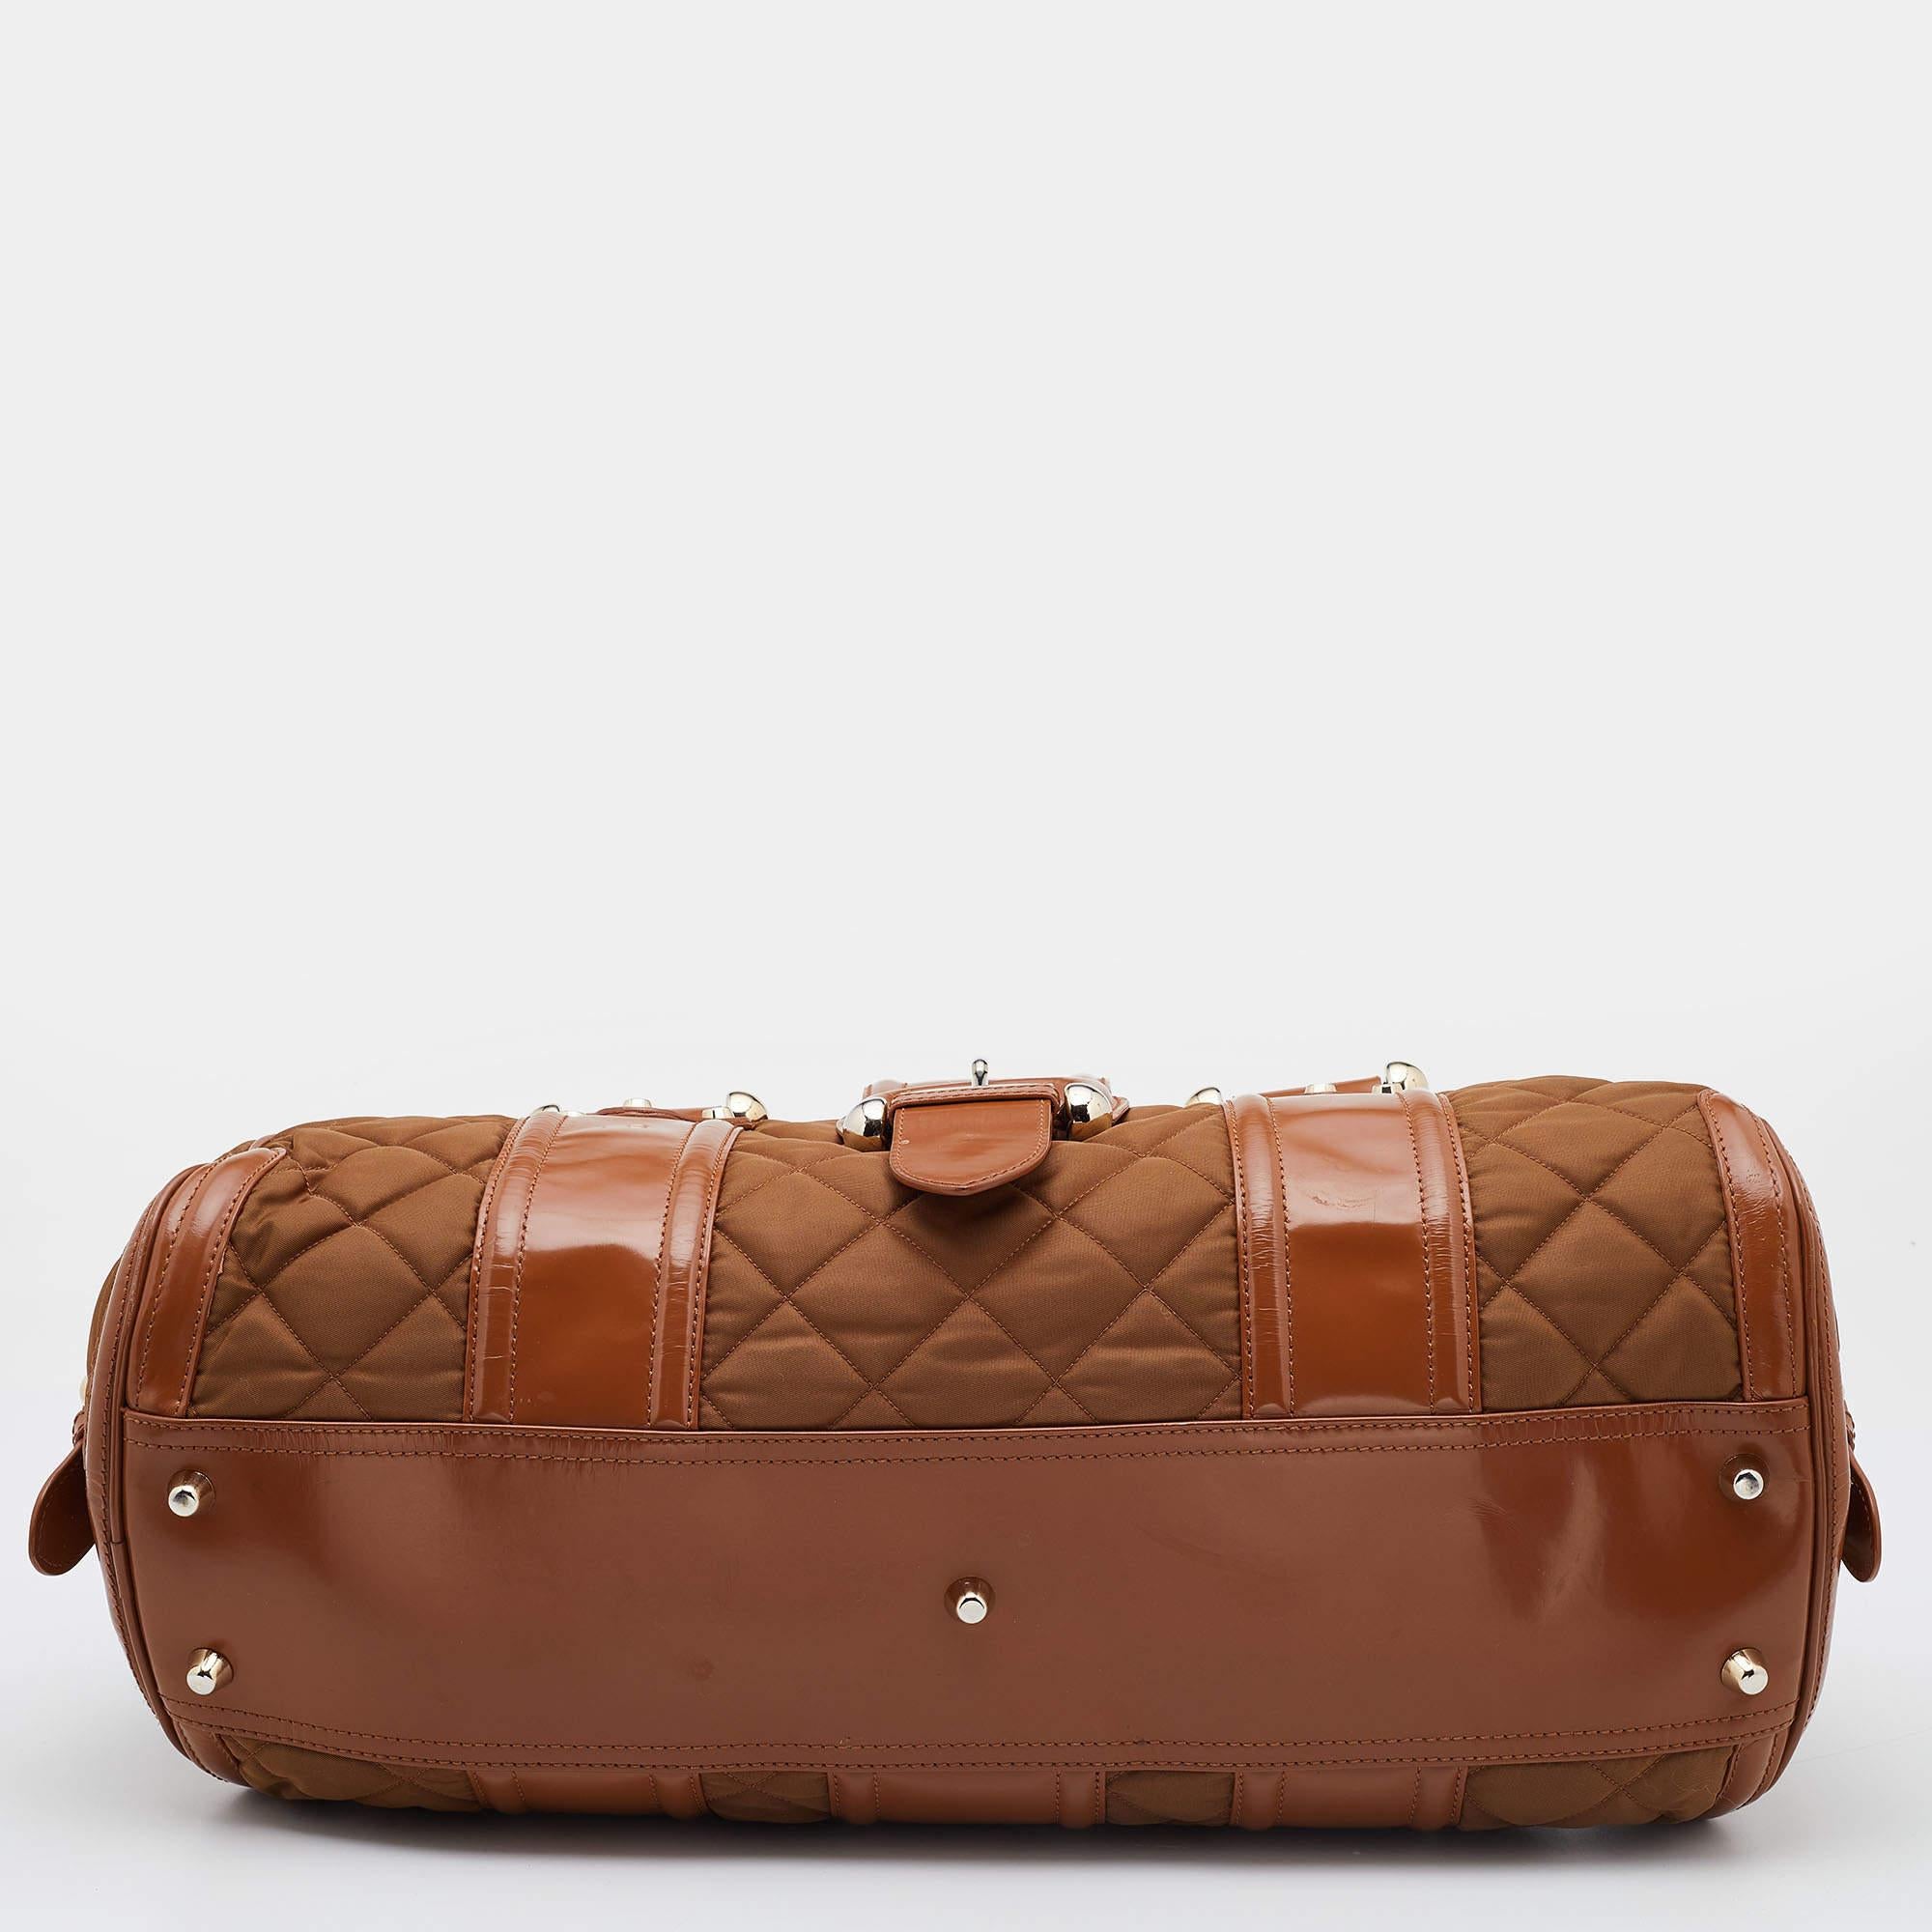 Burberry Brown/Tan Nylon and Leather Large Manor Satchel For Sale 6